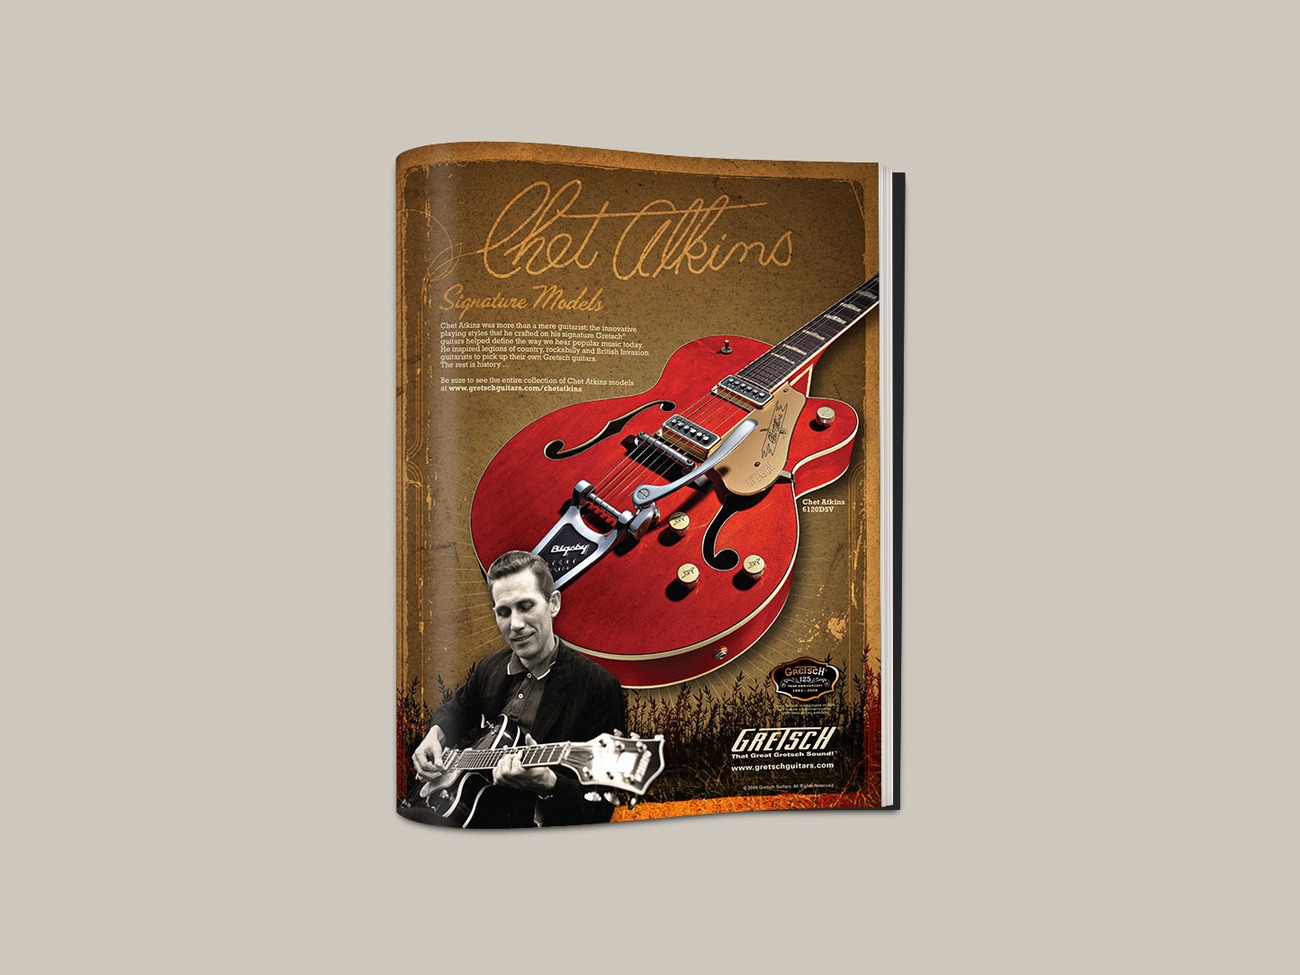 Gretsch 125th Anniversary Advertisement with Chet Atkins